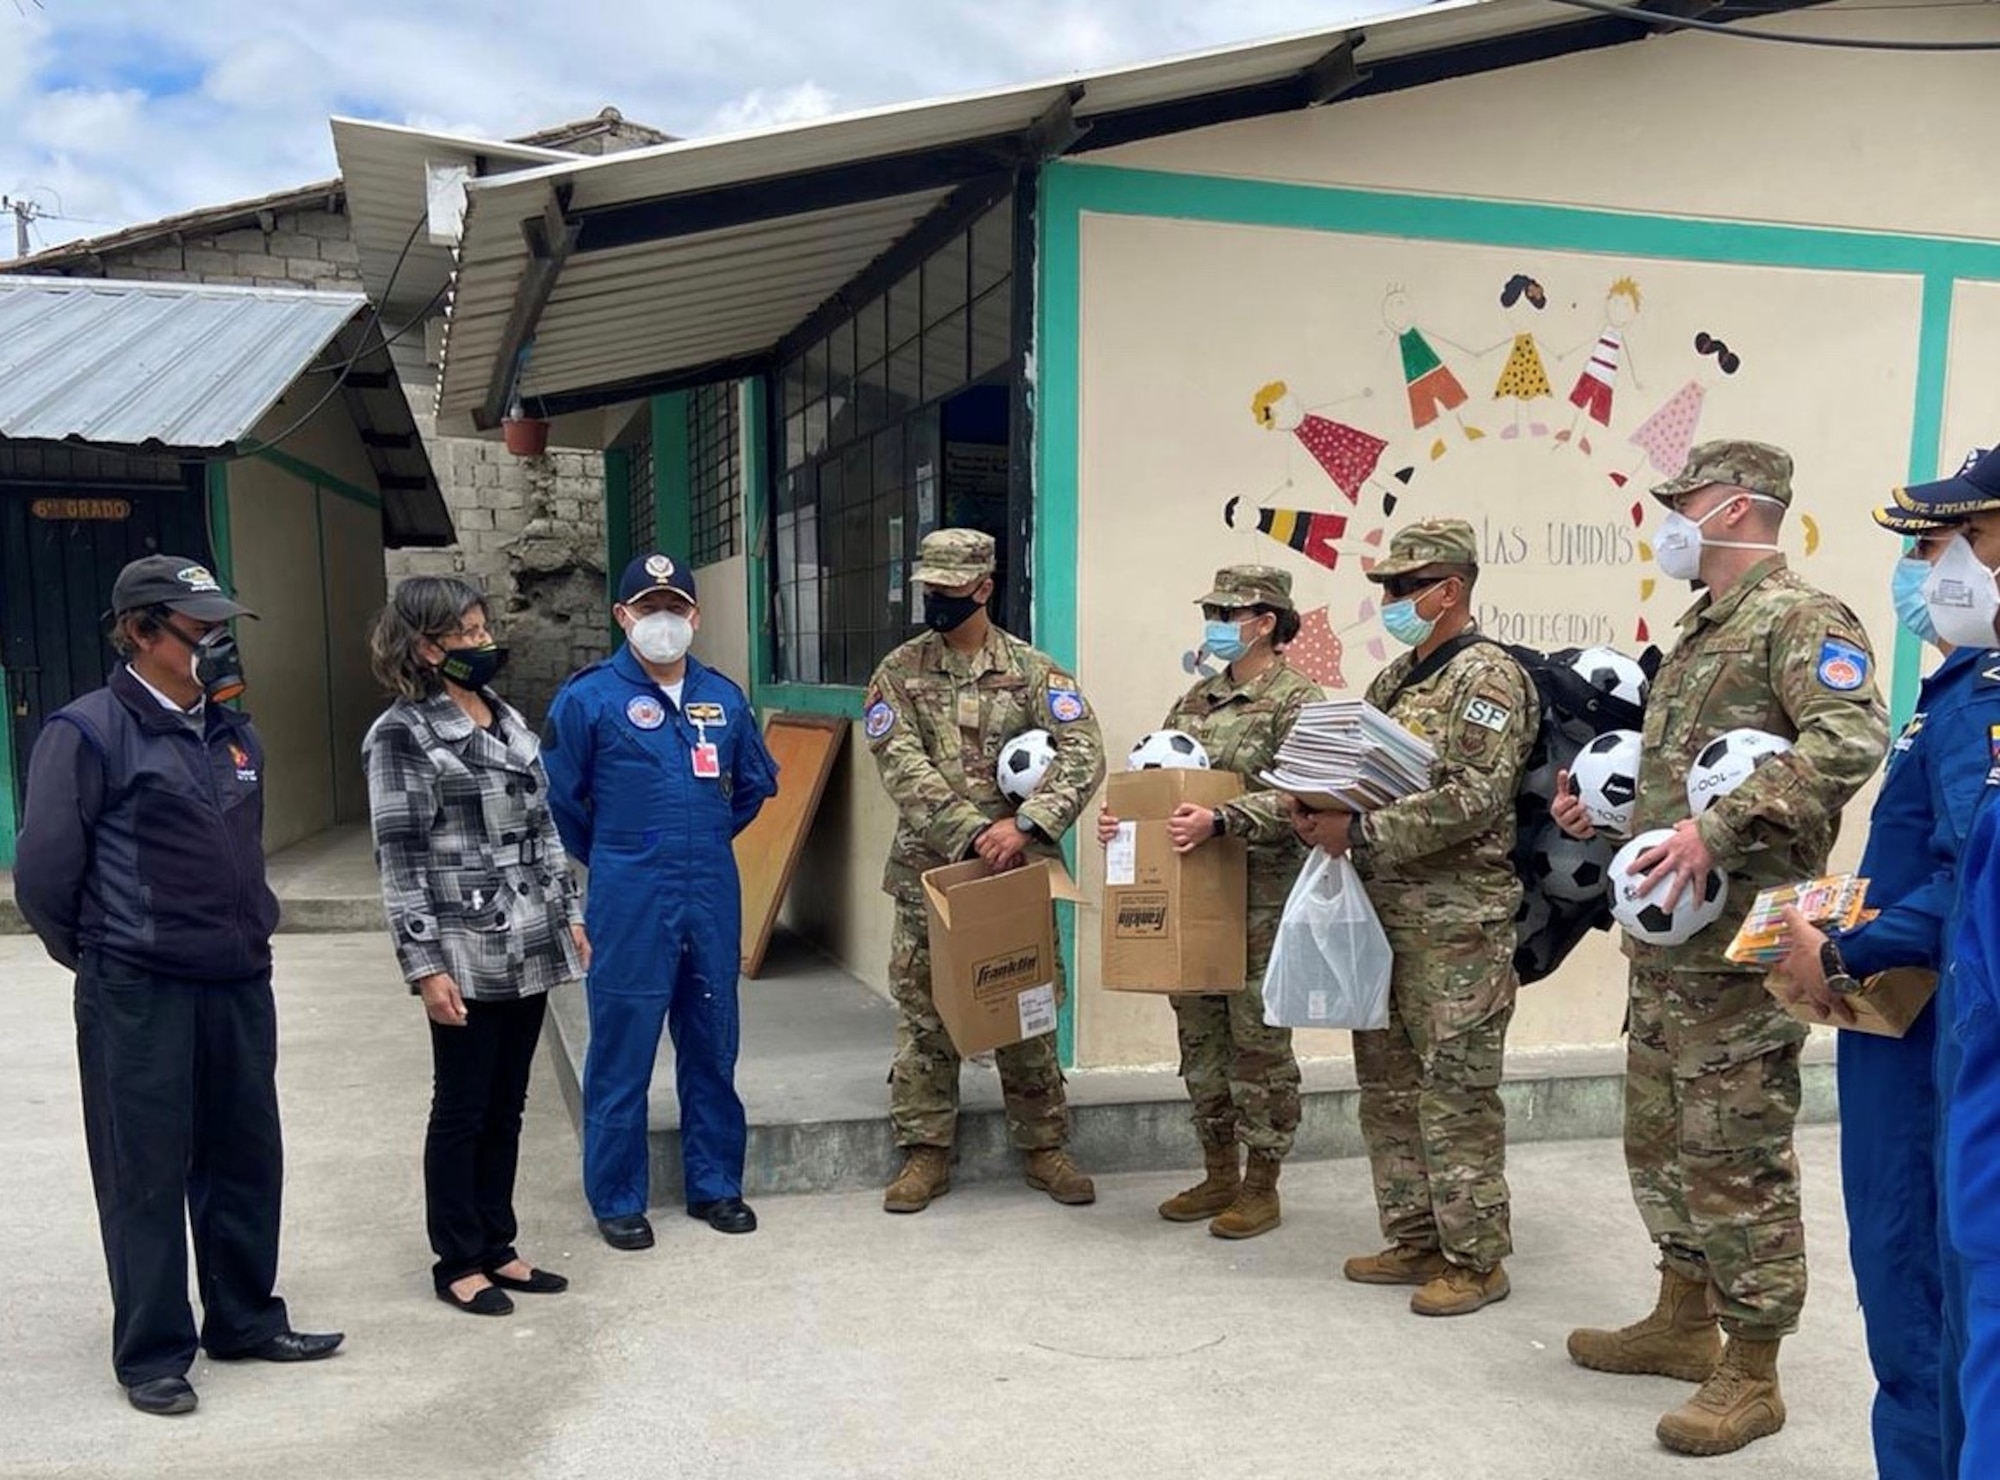 Members of the Fuerza Aérea Ecuatoriana and the U.S. Air Force’s 571st Mobility Support Advisory Squadron Mobile Training Team deliver school supplies and soccer balls July 30, 2020, to a local school near Latacunga, Ecuador. (U.S. Air Force photo by Tech. Sgt. James Garcia Arvelo)